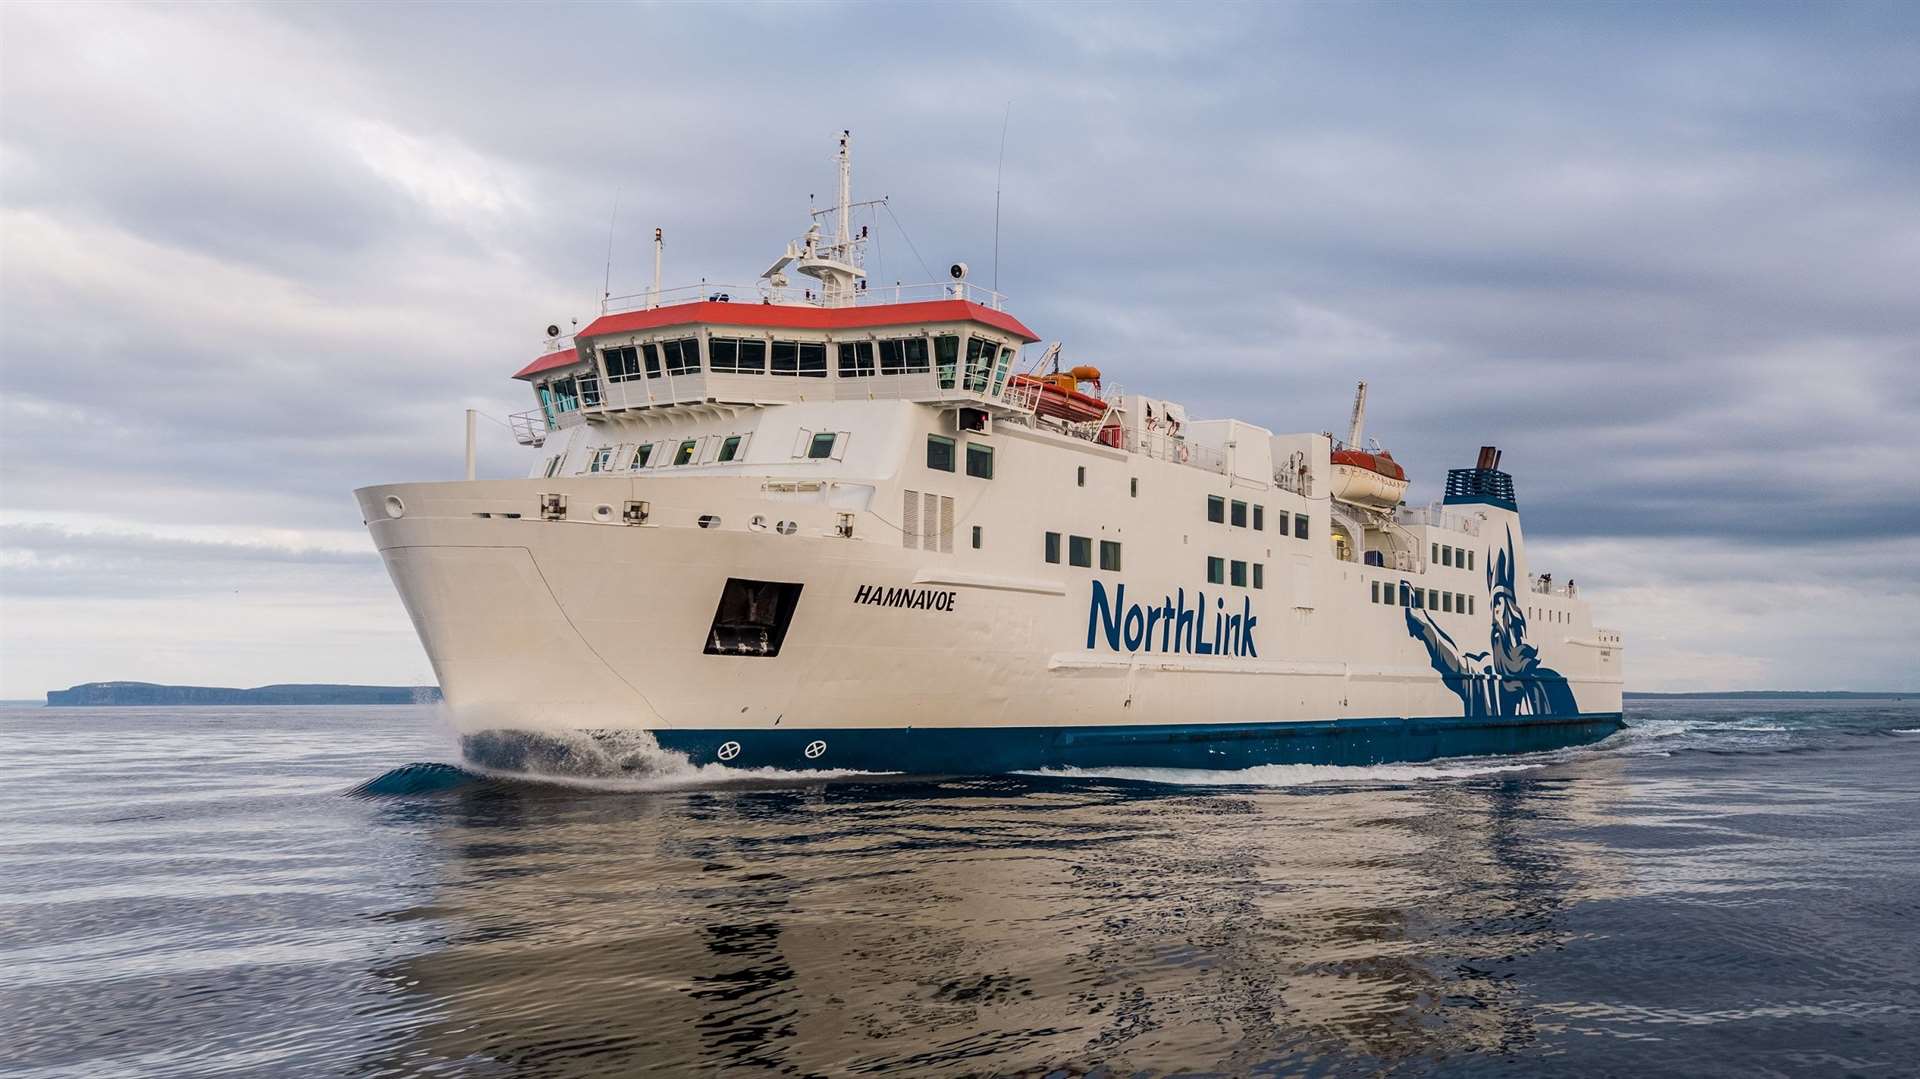 Fares have been frozen on NorthLink's ferries, including the Hamnavoe that operates between Scrabster and Stromness.